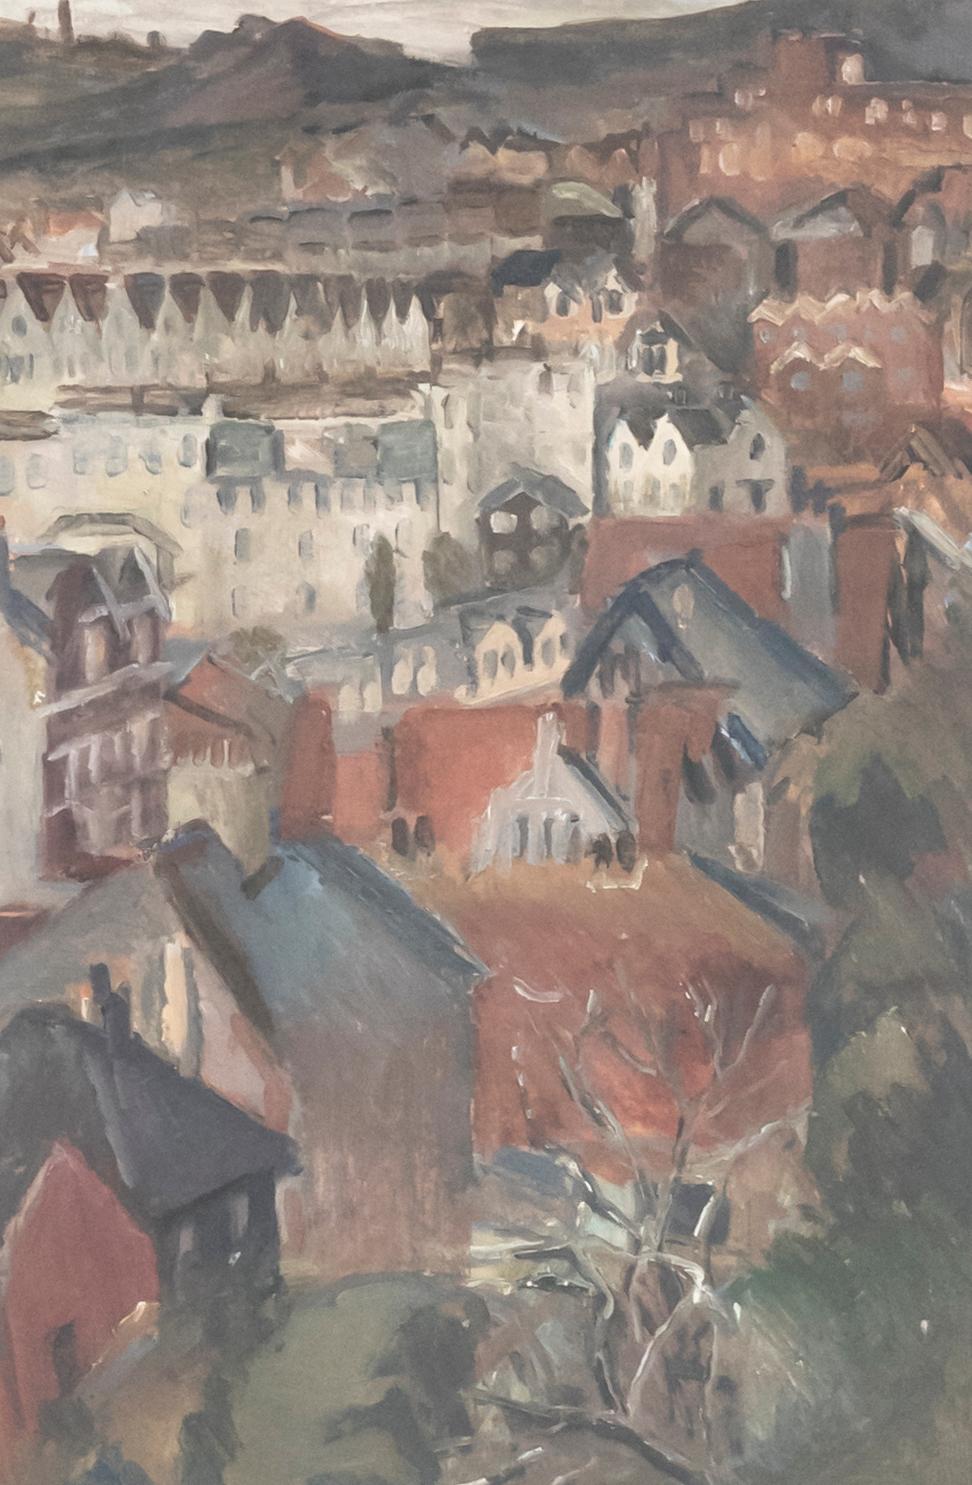 A charming oil study depicting a sweeping view over a town with lined terraced houses. Unsigned. Presented in a light wooden frame. On paper.
